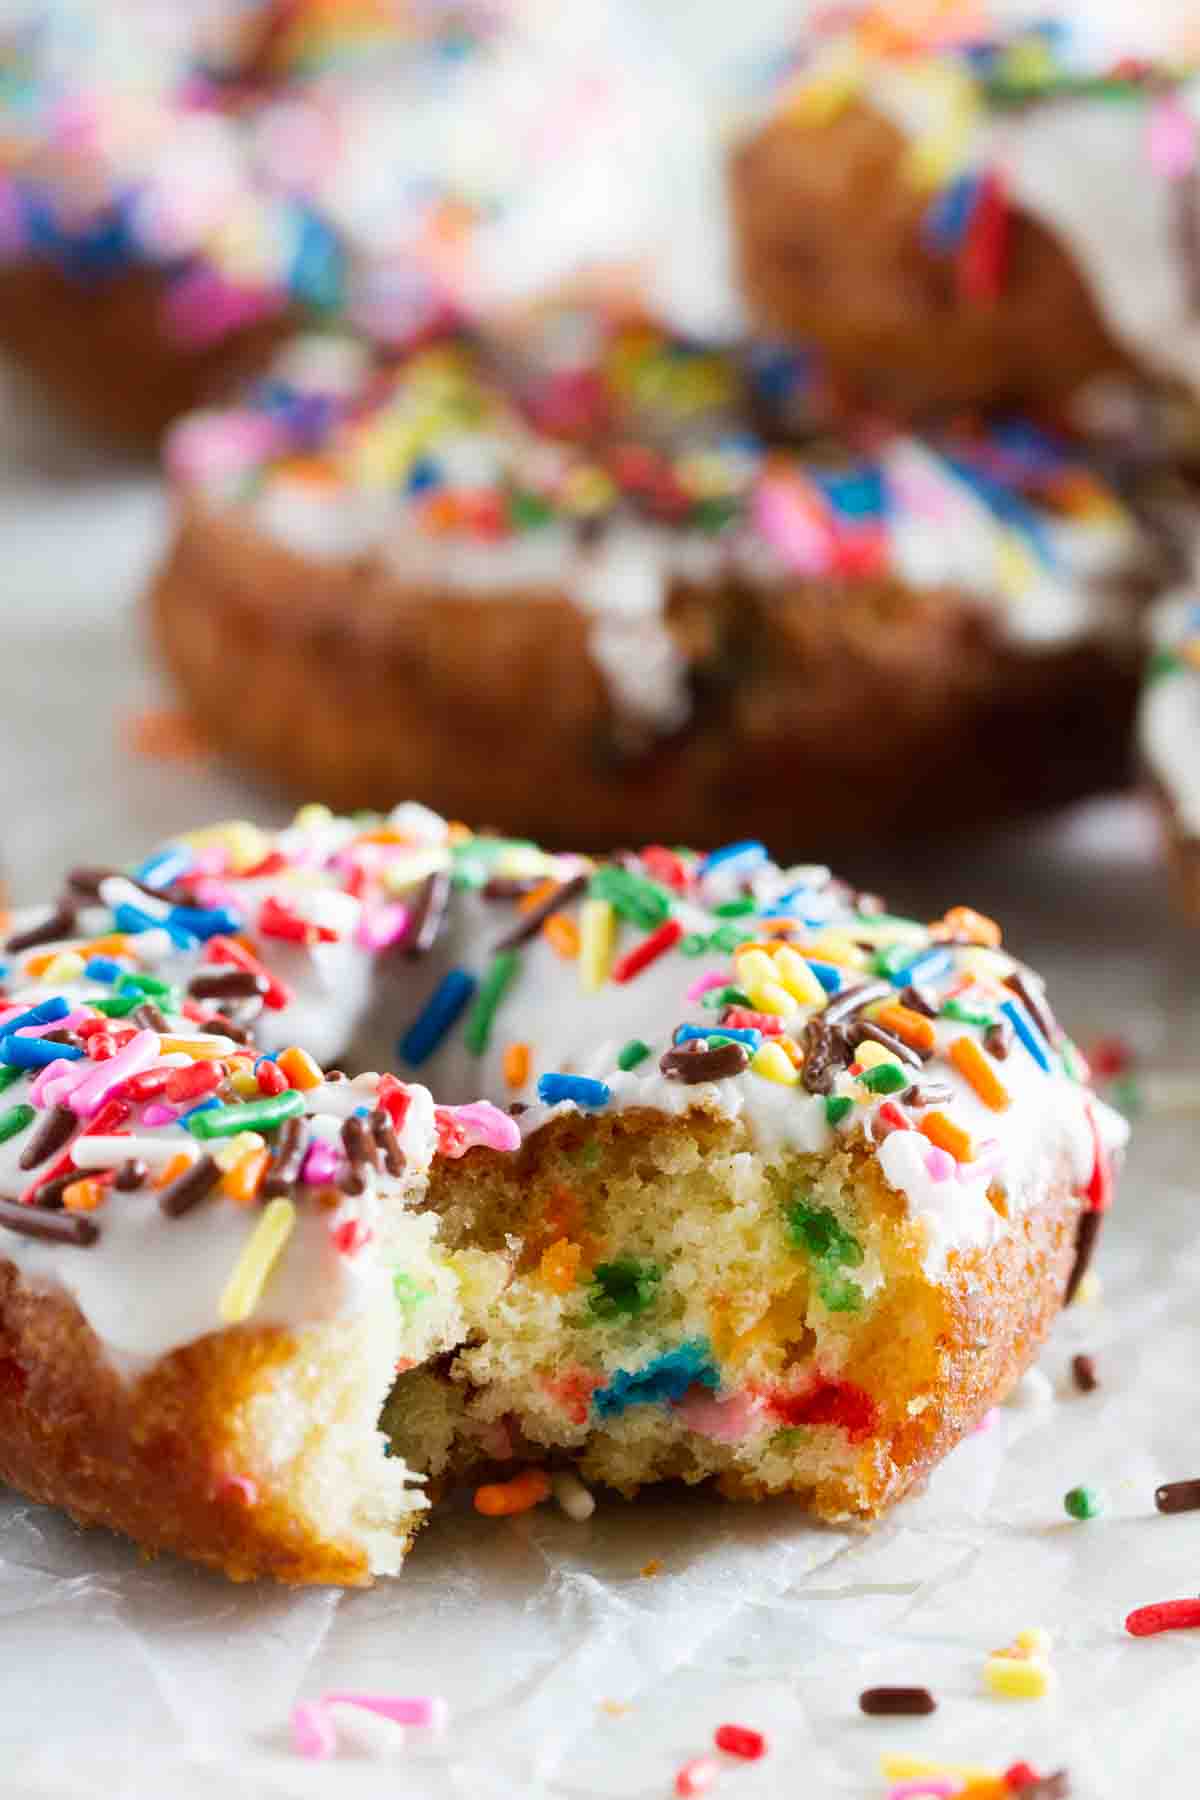 Funfetti donut with a bite taken from it